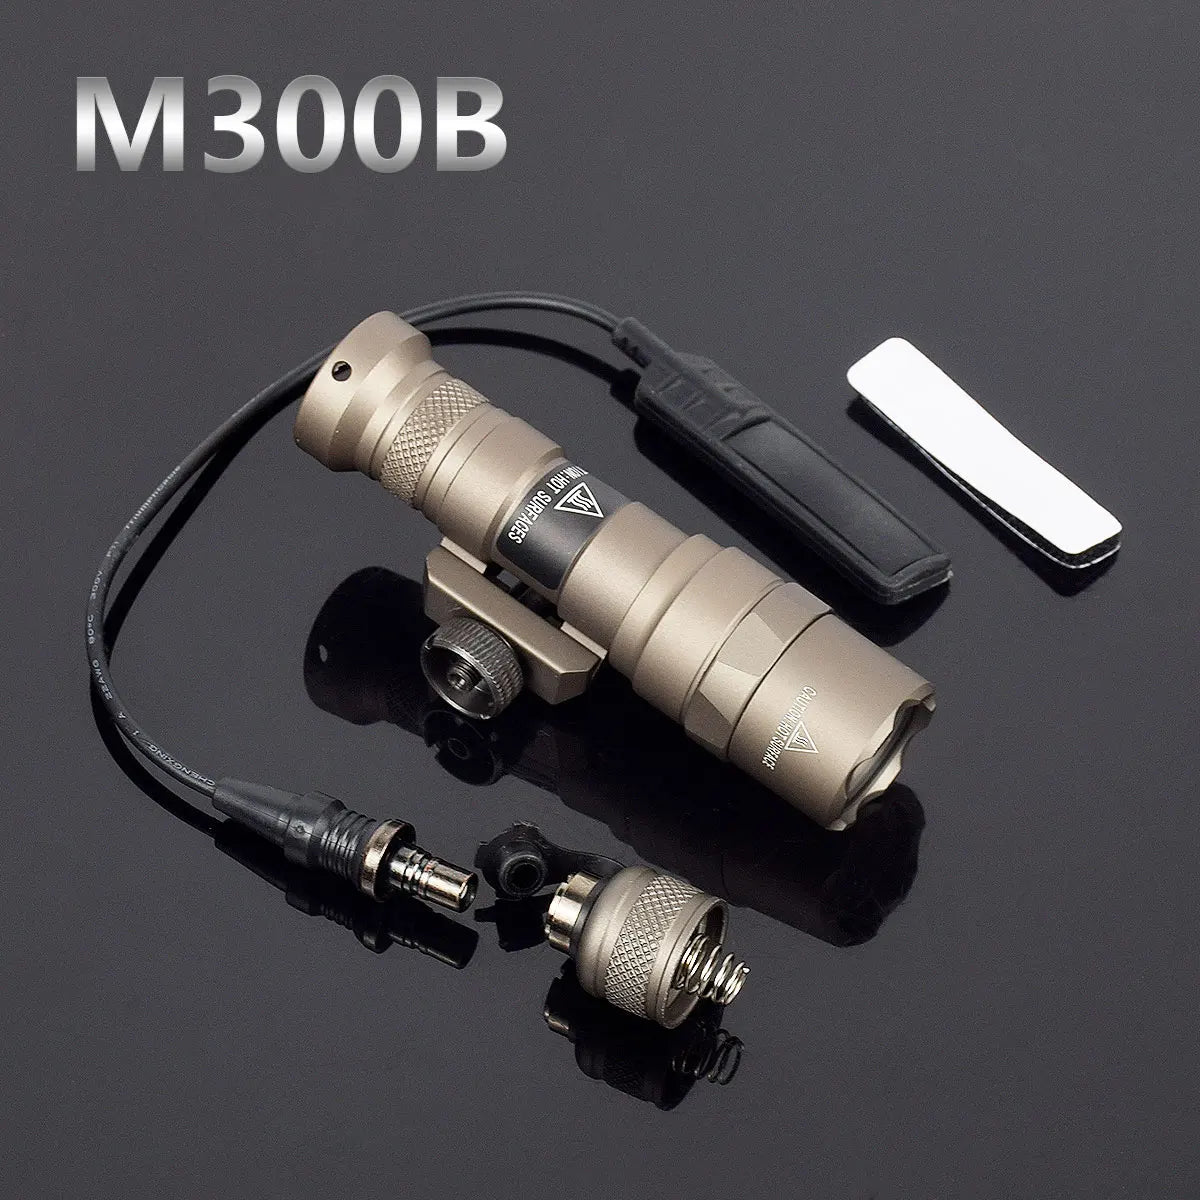 Tan tactical flashlight with pressure switch and mount on black.